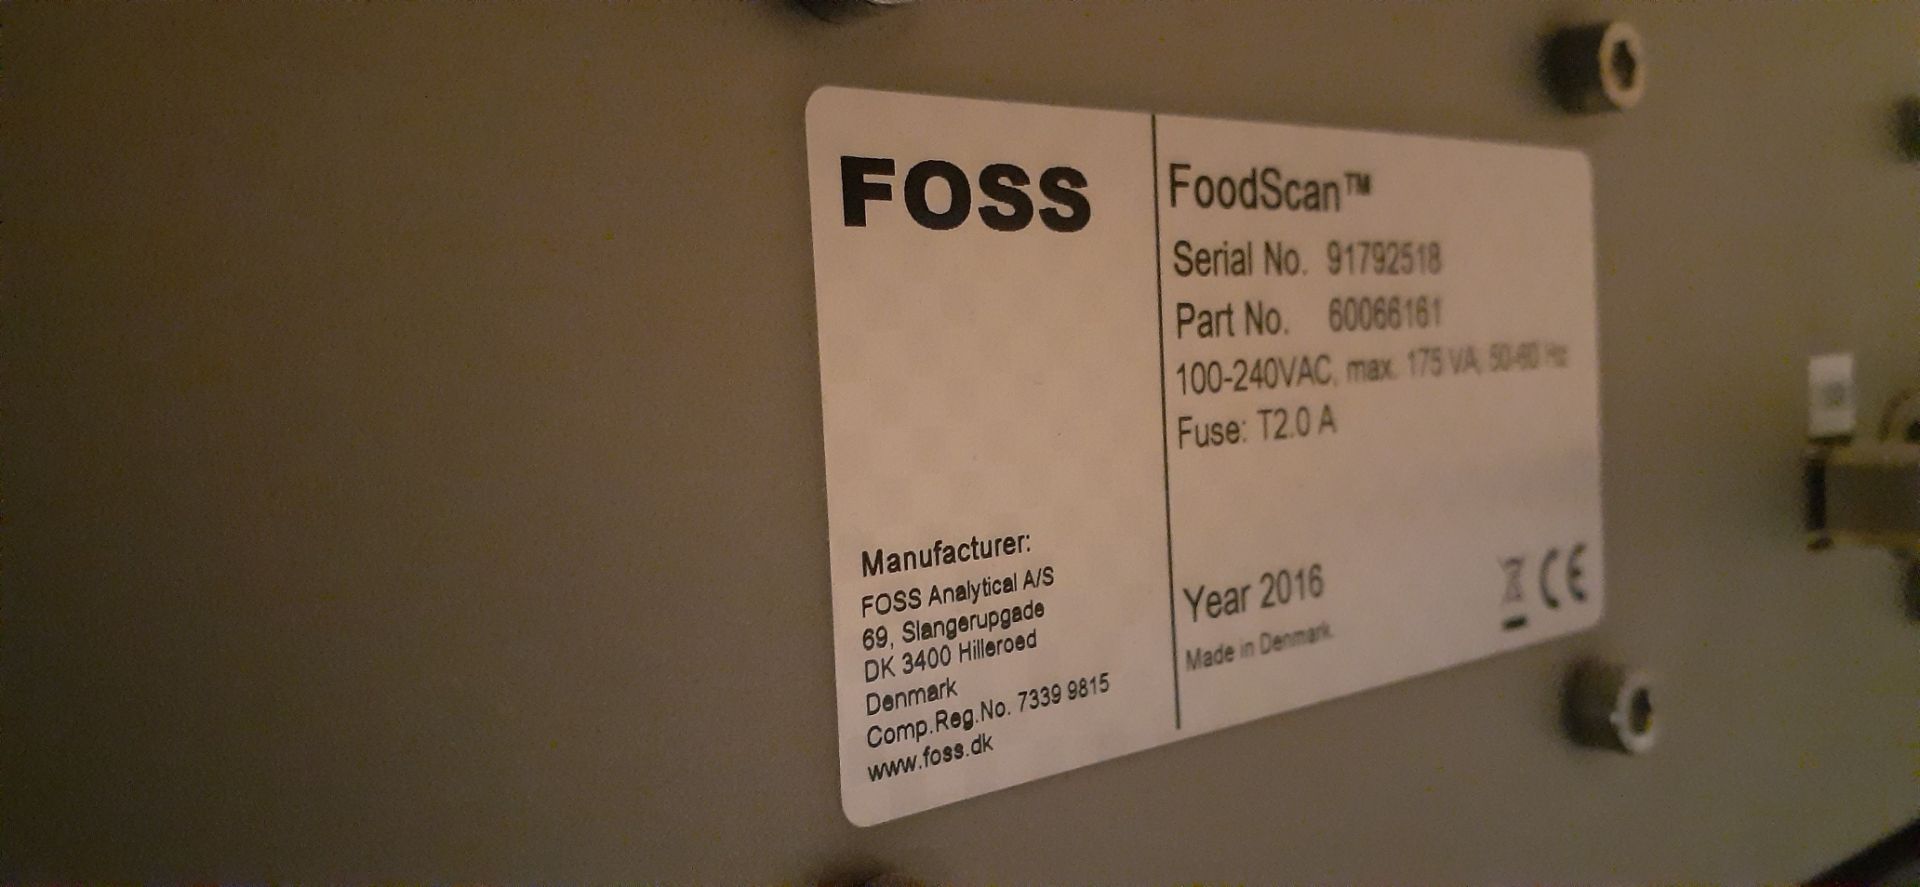 Foss Foodscan Lab, S/N 91792518, VAC 100-240, Year 2016 (Located Hicksville, OH) - Image 23 of 23